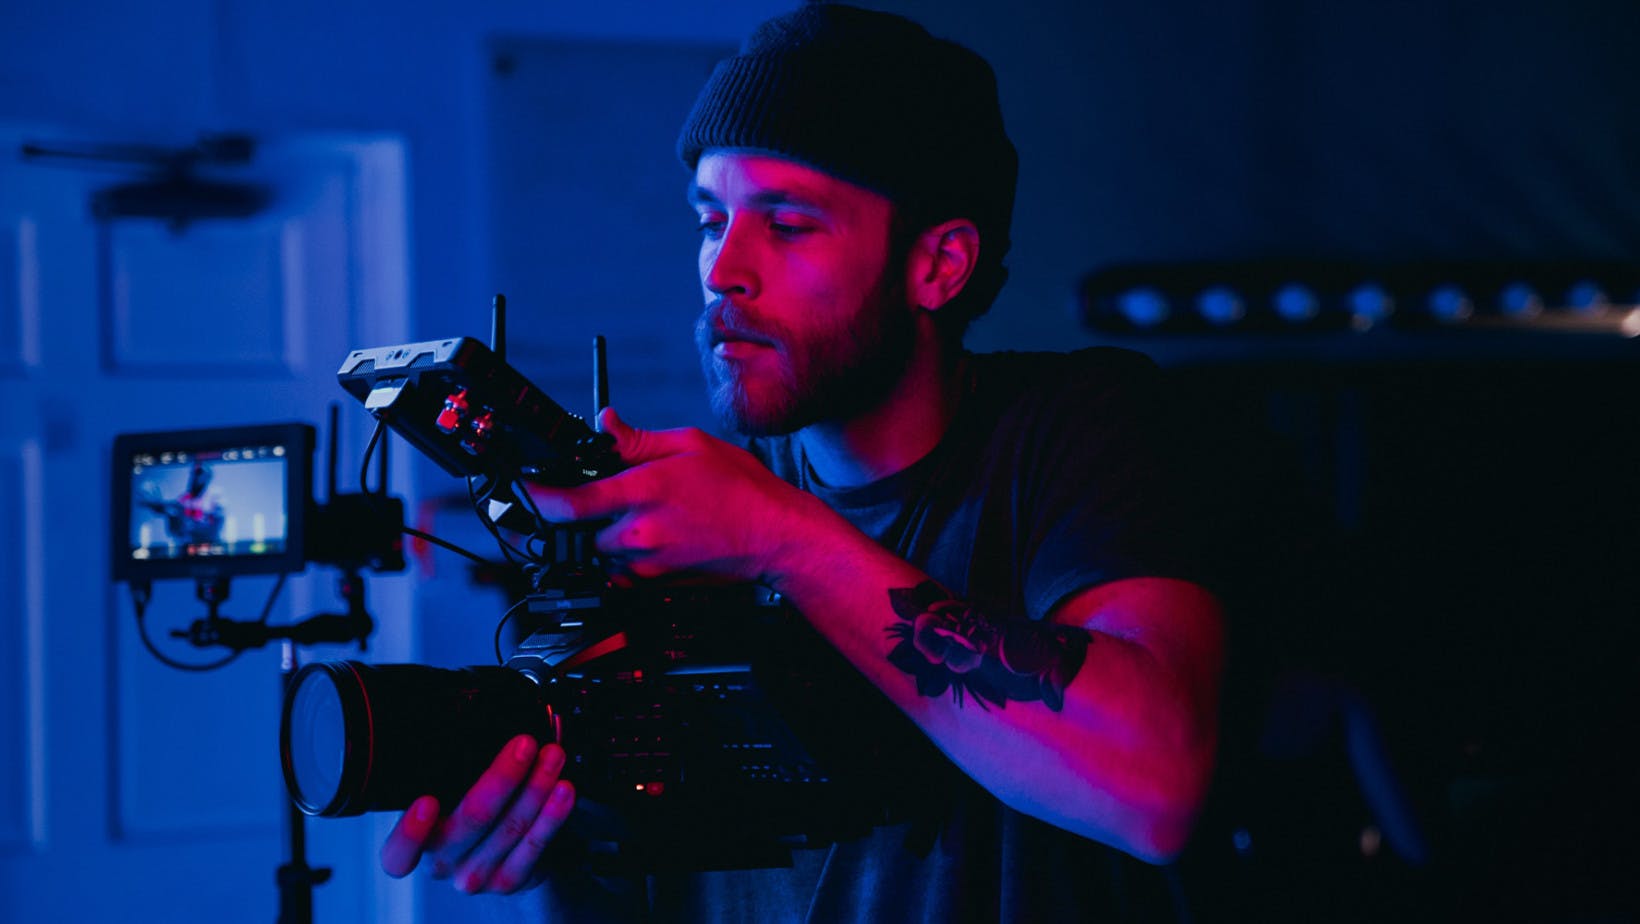 A bearded man with a video camera created a film. This represents a film degree that pays well.